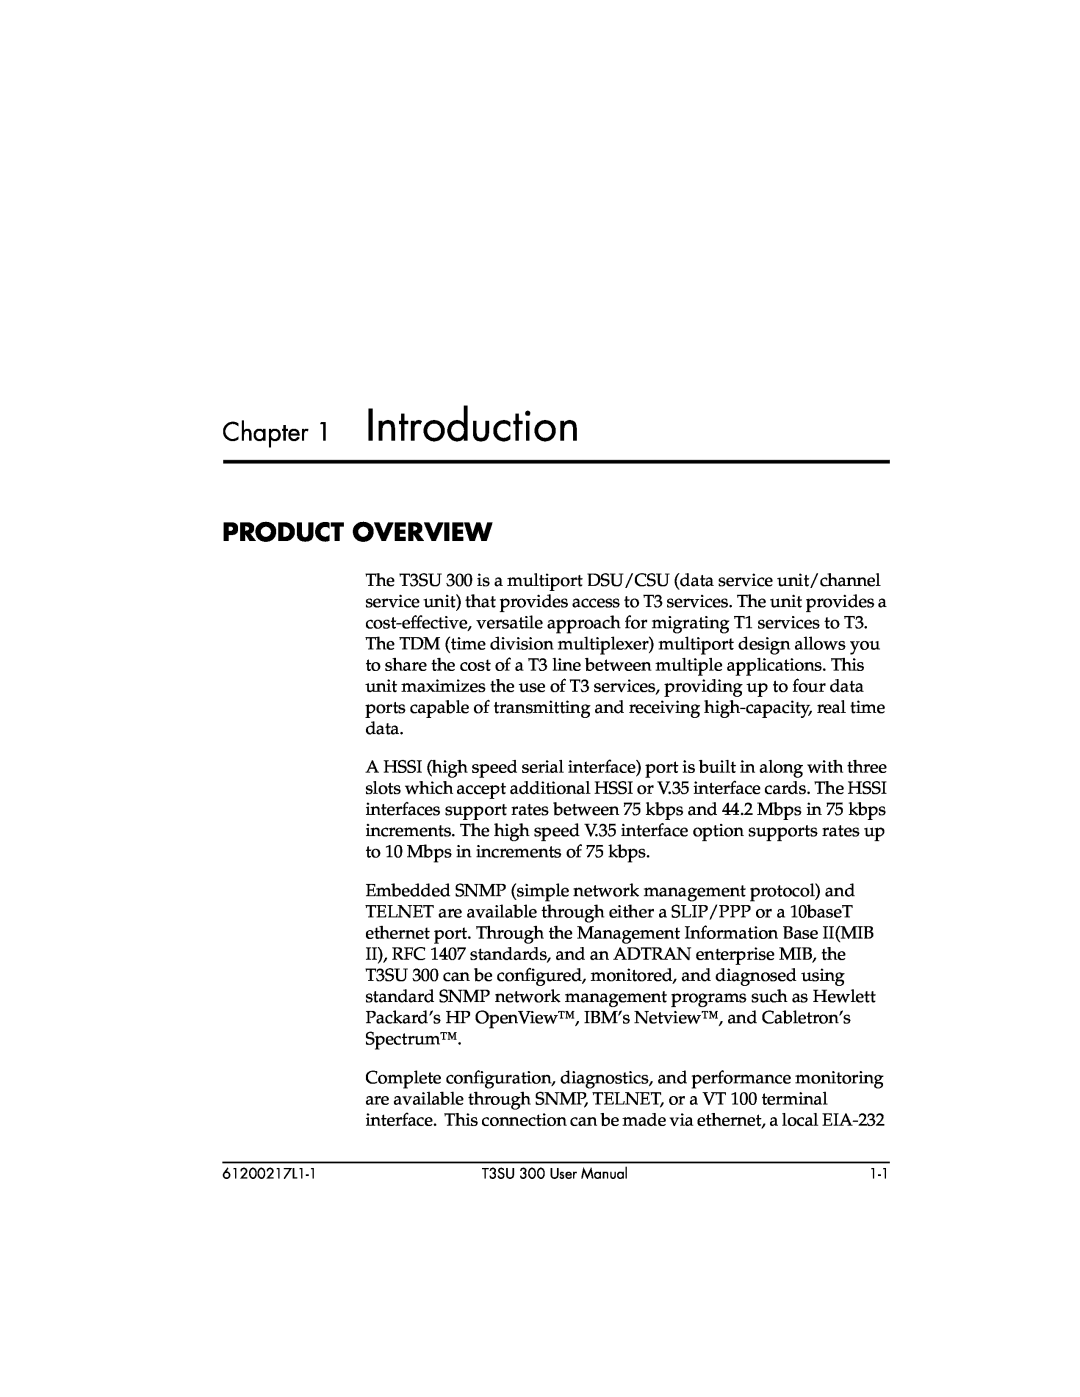 ADTRAN T3SU 300 user manual Introduction, Product Overview 